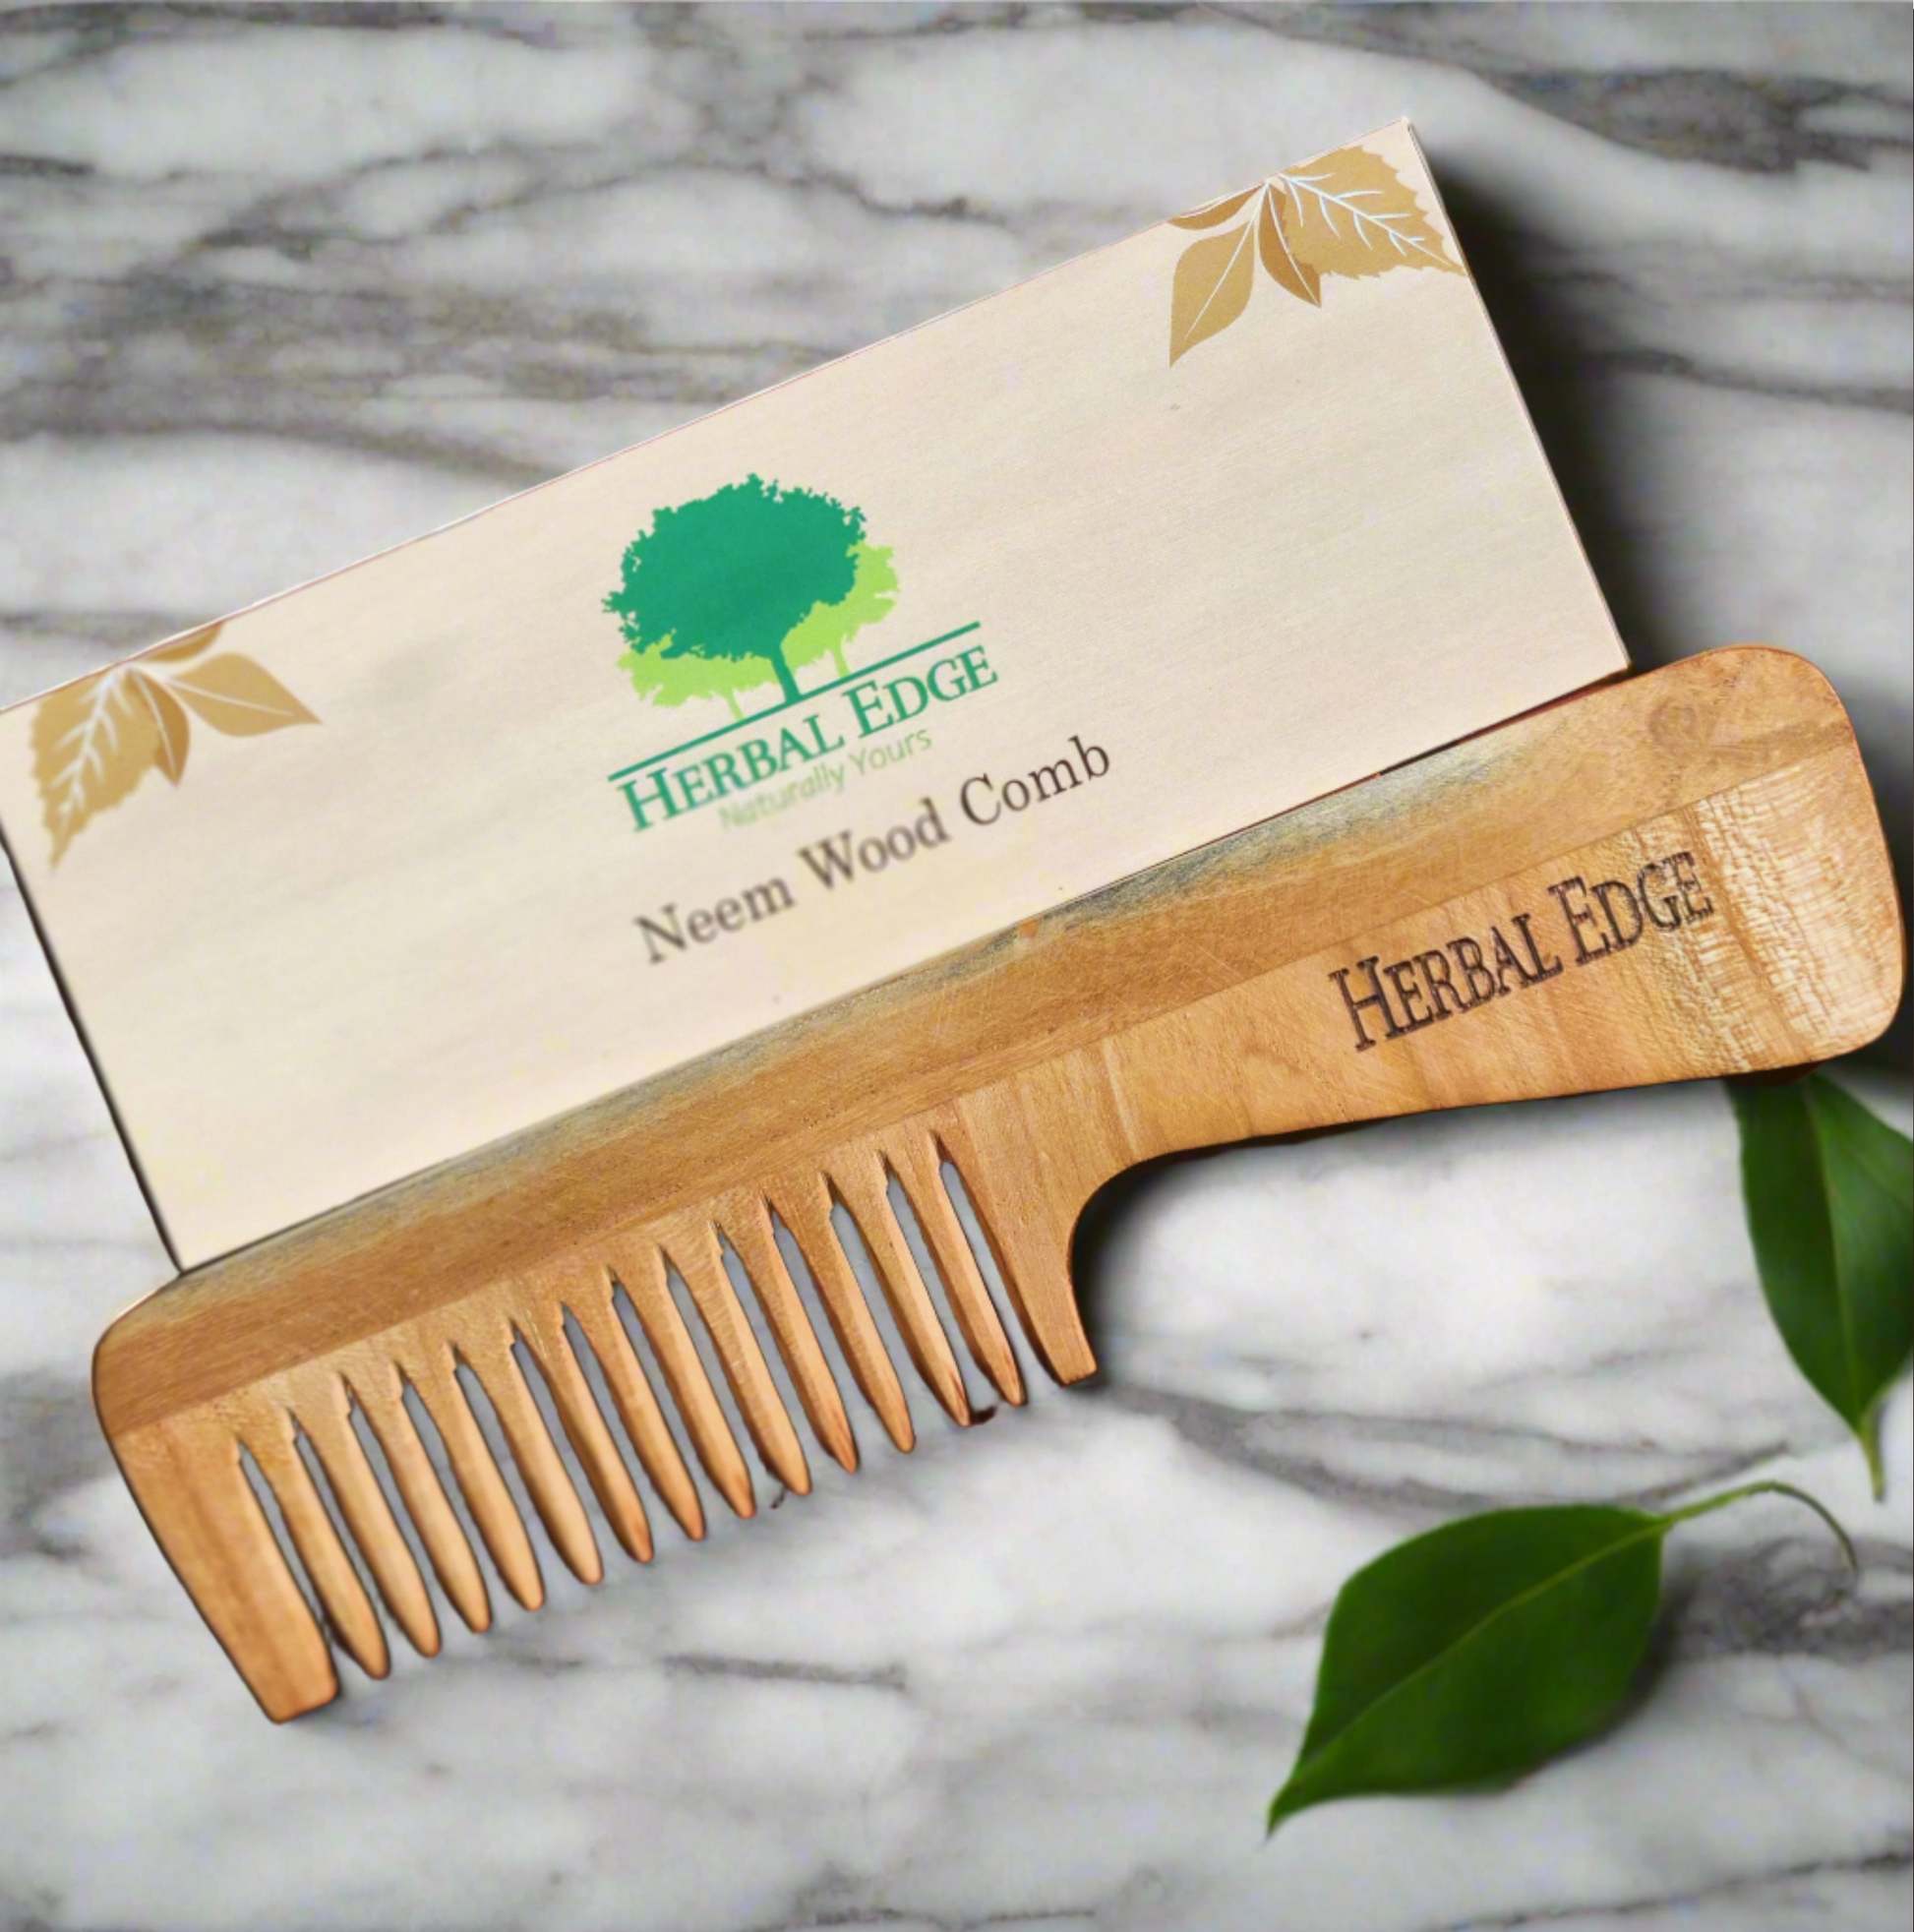 pure wood neem combs for less hair fall, dandruff & shiny hair. These handmade neem combs are made in India using ethical practices & are not coated with lacquer.